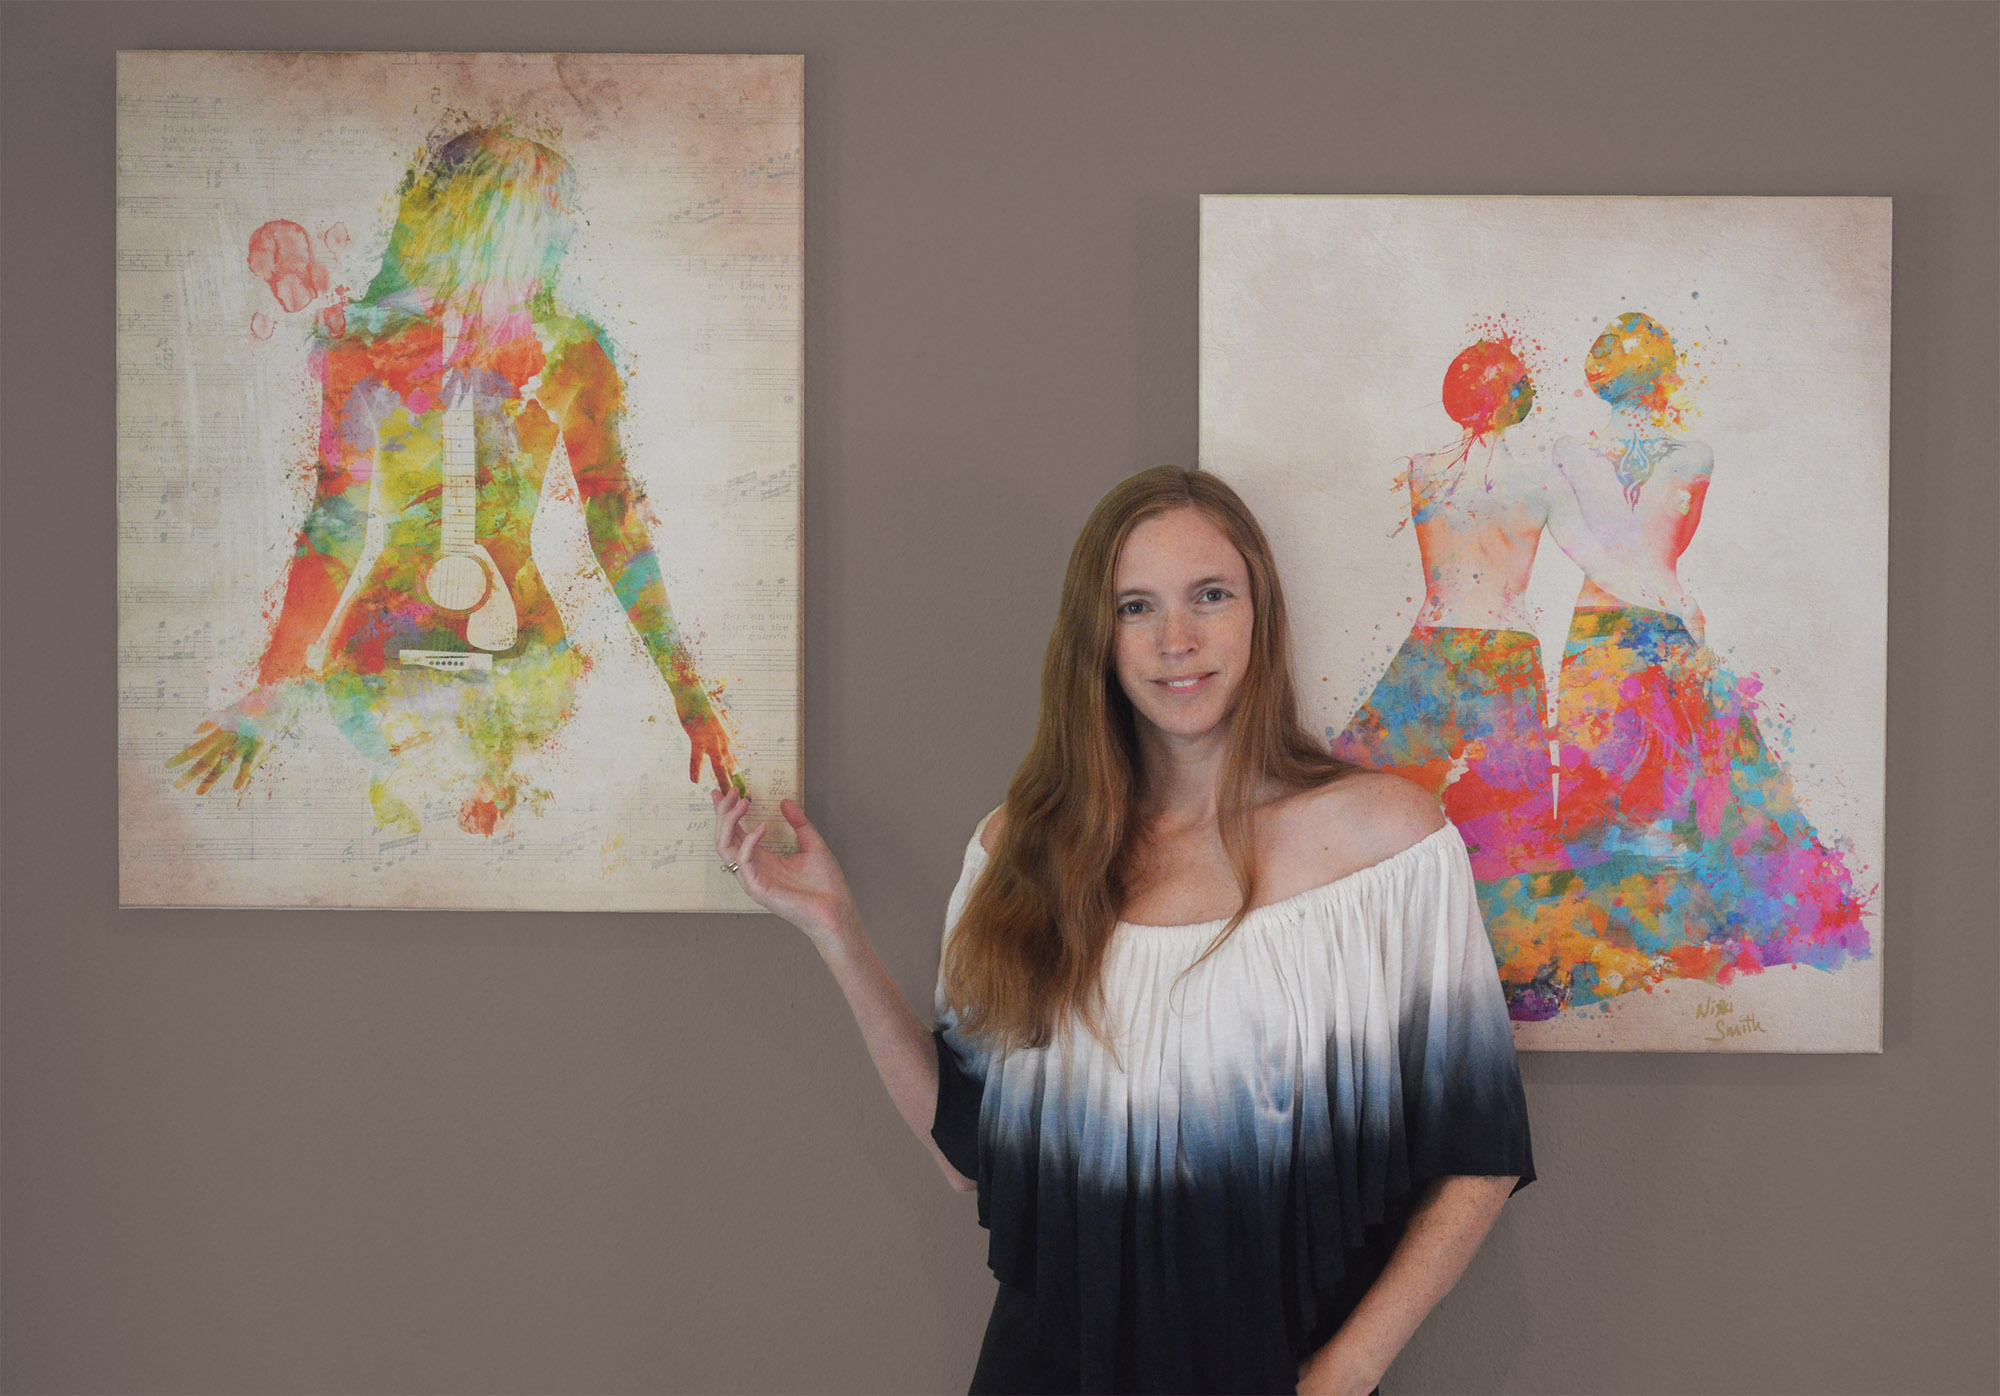 Artist Nikki Smith with her self-portrait "Music Was My First Love" and painting "Pride Not Prejudice"